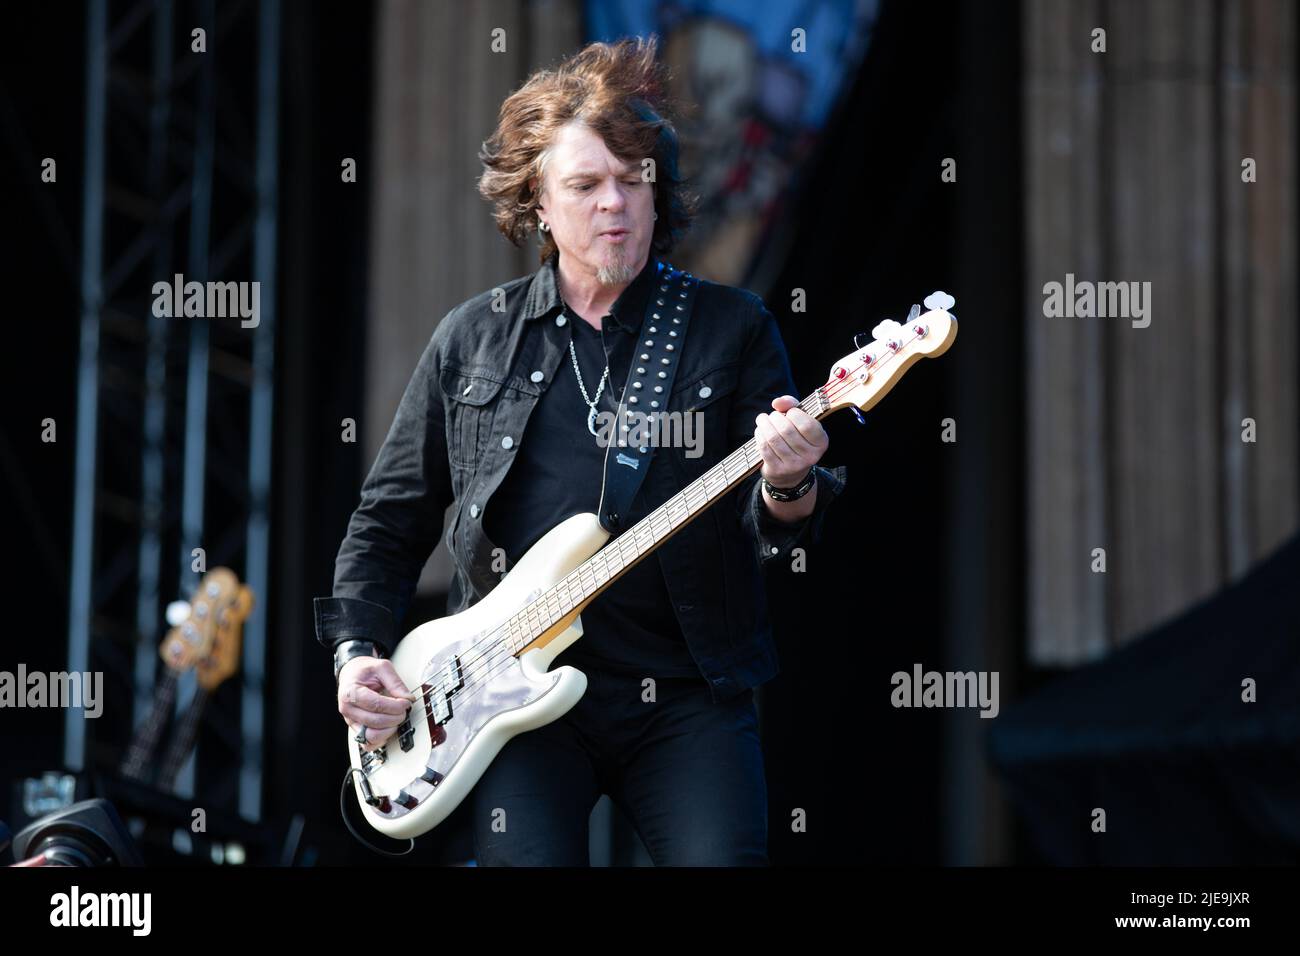 Oslo, Norway. 23rd, June 2022. The Swedish glam rock band Europe performs a live concert during the Norwegian music festival Tons of Rock 2022 in Oslo. Here bass player John Leven is seen live on stage. (Photo credit: Gonzales Photo - Per-Otto Oppi). Stock Photo